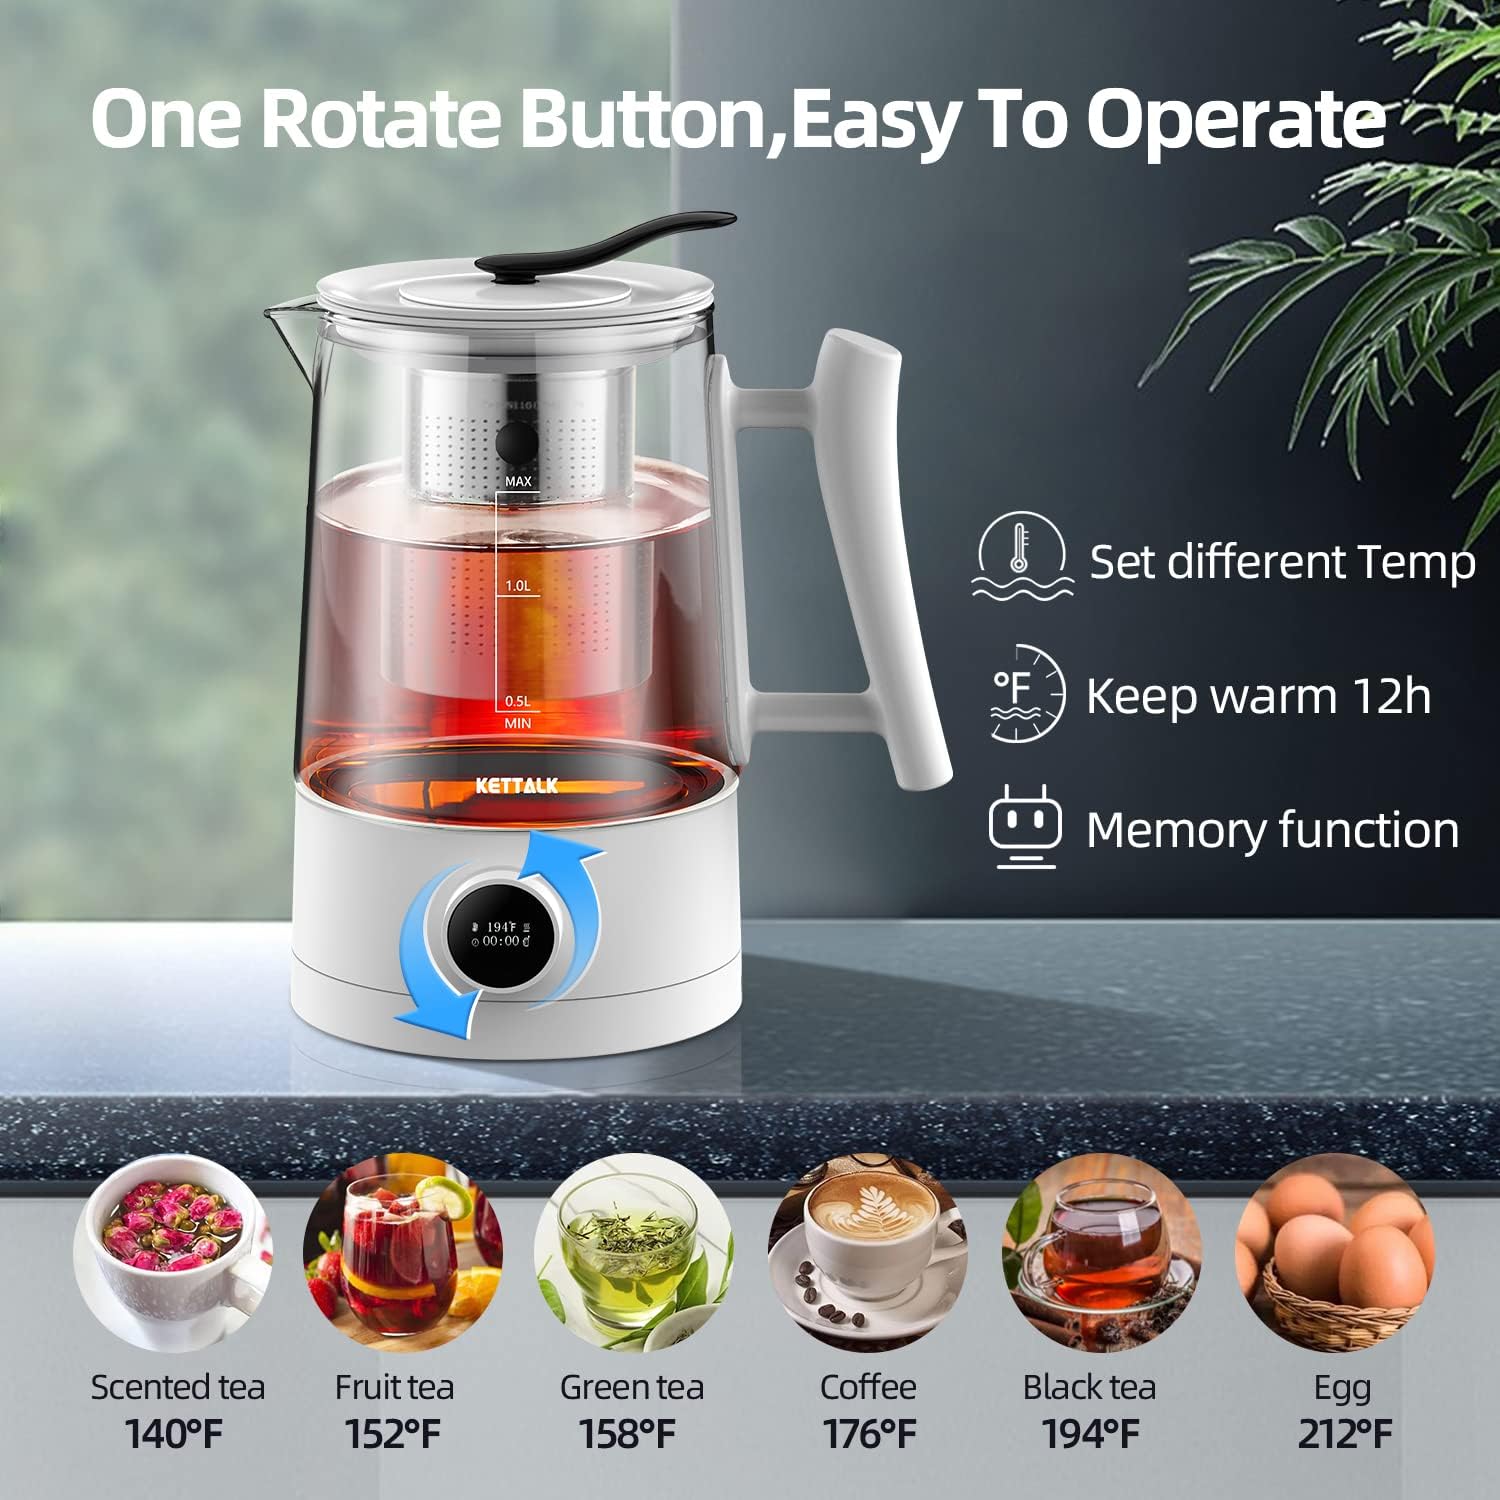 Electric Kettle,1.2L Electric Tea Kettle With Touch Control, Smart Temperature Control Hot Water Kettle With Removable Infuser,Tea Maker Coffee Pot Auto Shut-Off & Boil Dry Protection, 12H Keep Warm